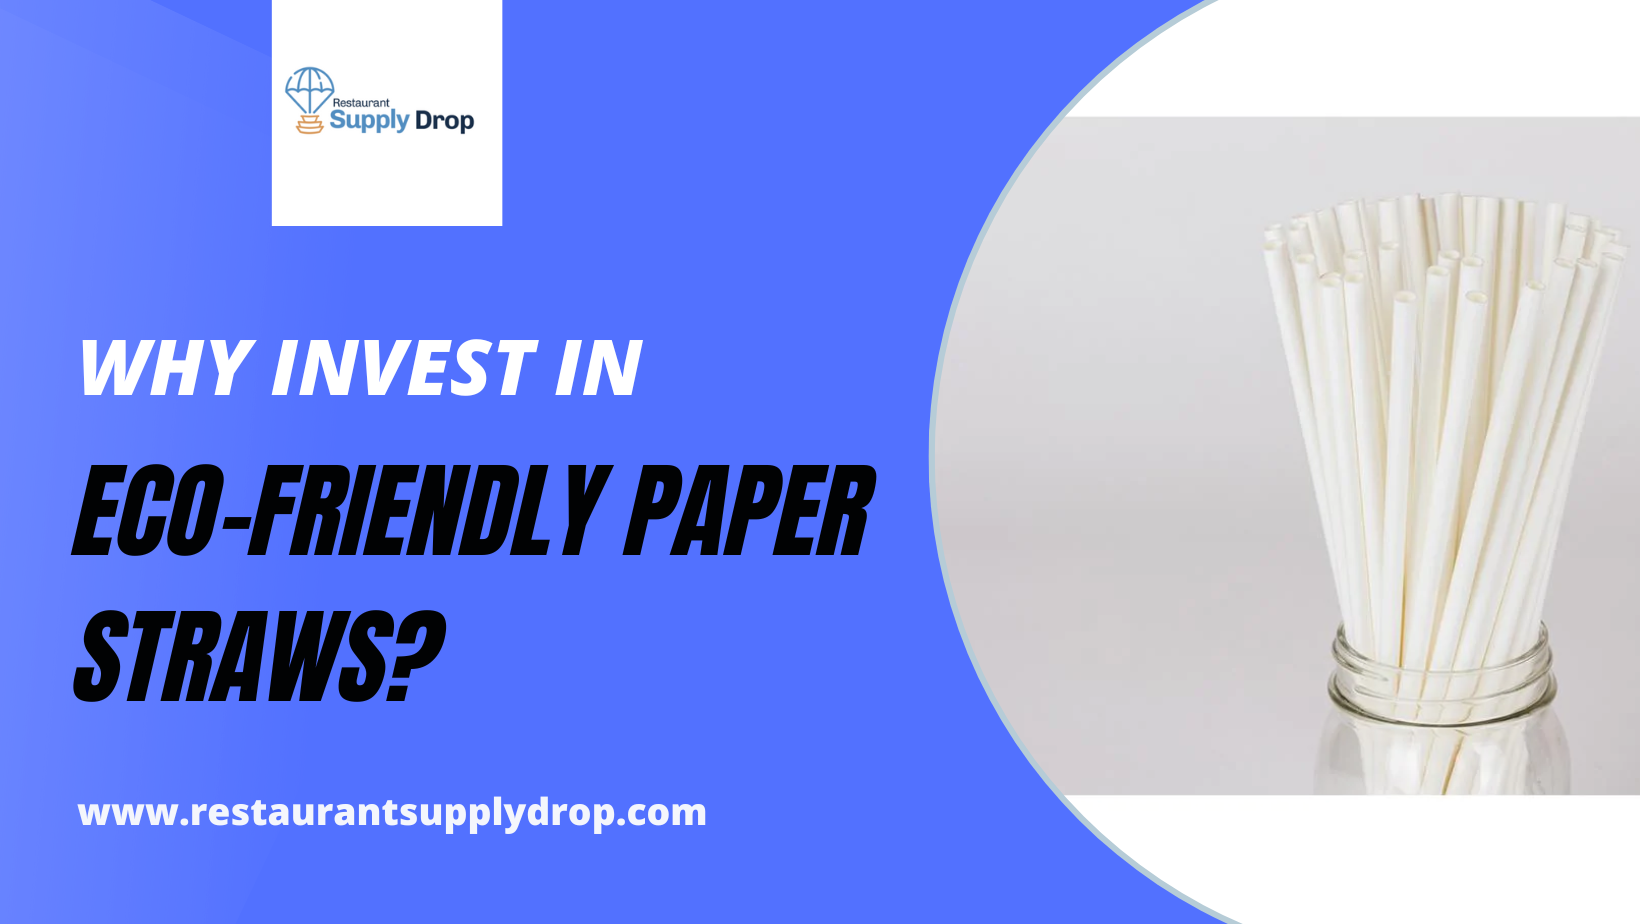 https://cdn.shopify.com/s/files/1/3105/5038/files/why_invest.png?v=1667296764